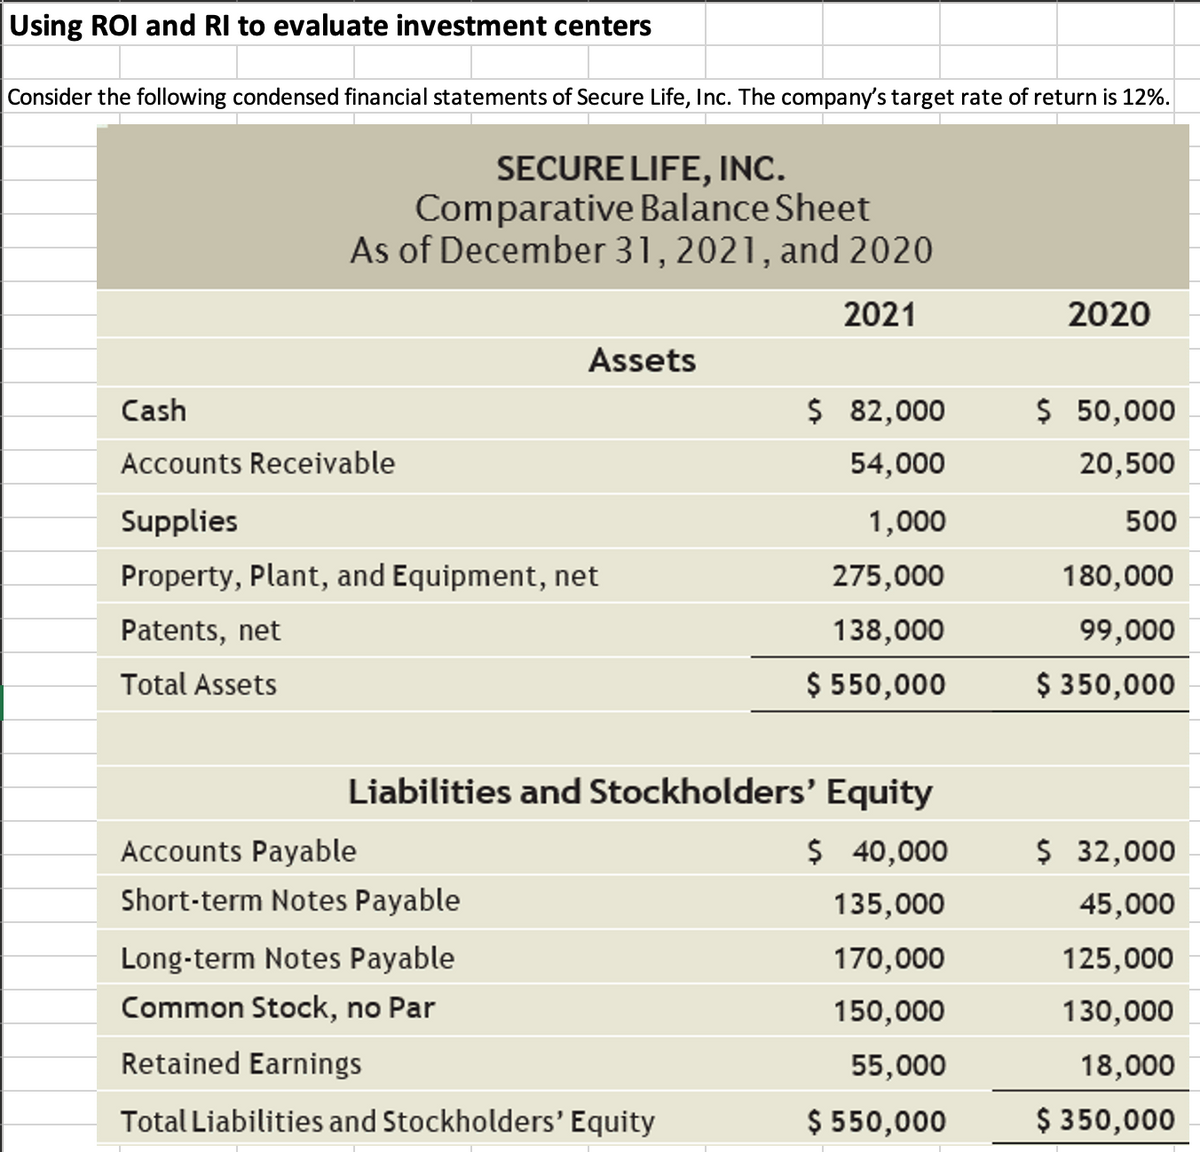 Using ROI and RI to evaluate investment centers
Consider the following condensed financial statements of Secure Life, Inc. The company's target rate of return is 12%.
SECURE LIFE, INC.
Comparative Balance Sheet
As of December 31, 2021, and 2020
2021
2020
Assets
Cash
$ 82,000
$ 50,000
Accounts Receivable
54,000
20,500
Supplies
1,000
500
Property, Plant, and Equipment, net
275,000
180,000
Patents, net
138,000
99,000
Total Assets
$ 550,000
$ 350,000
Liabilities and Stockholders' Equity
Accounts Payable
$ 40,000
$ 32,000
Short-term Notes Payable
135,000
45,000
Long-term Notes Payable
170,000
125,000
Common Stock, no Par
150,000
130,000
Retained Earnings
55,000
18,000
Total Liabilities and Stockholders' Equity
$ 550,000
$ 350,000
